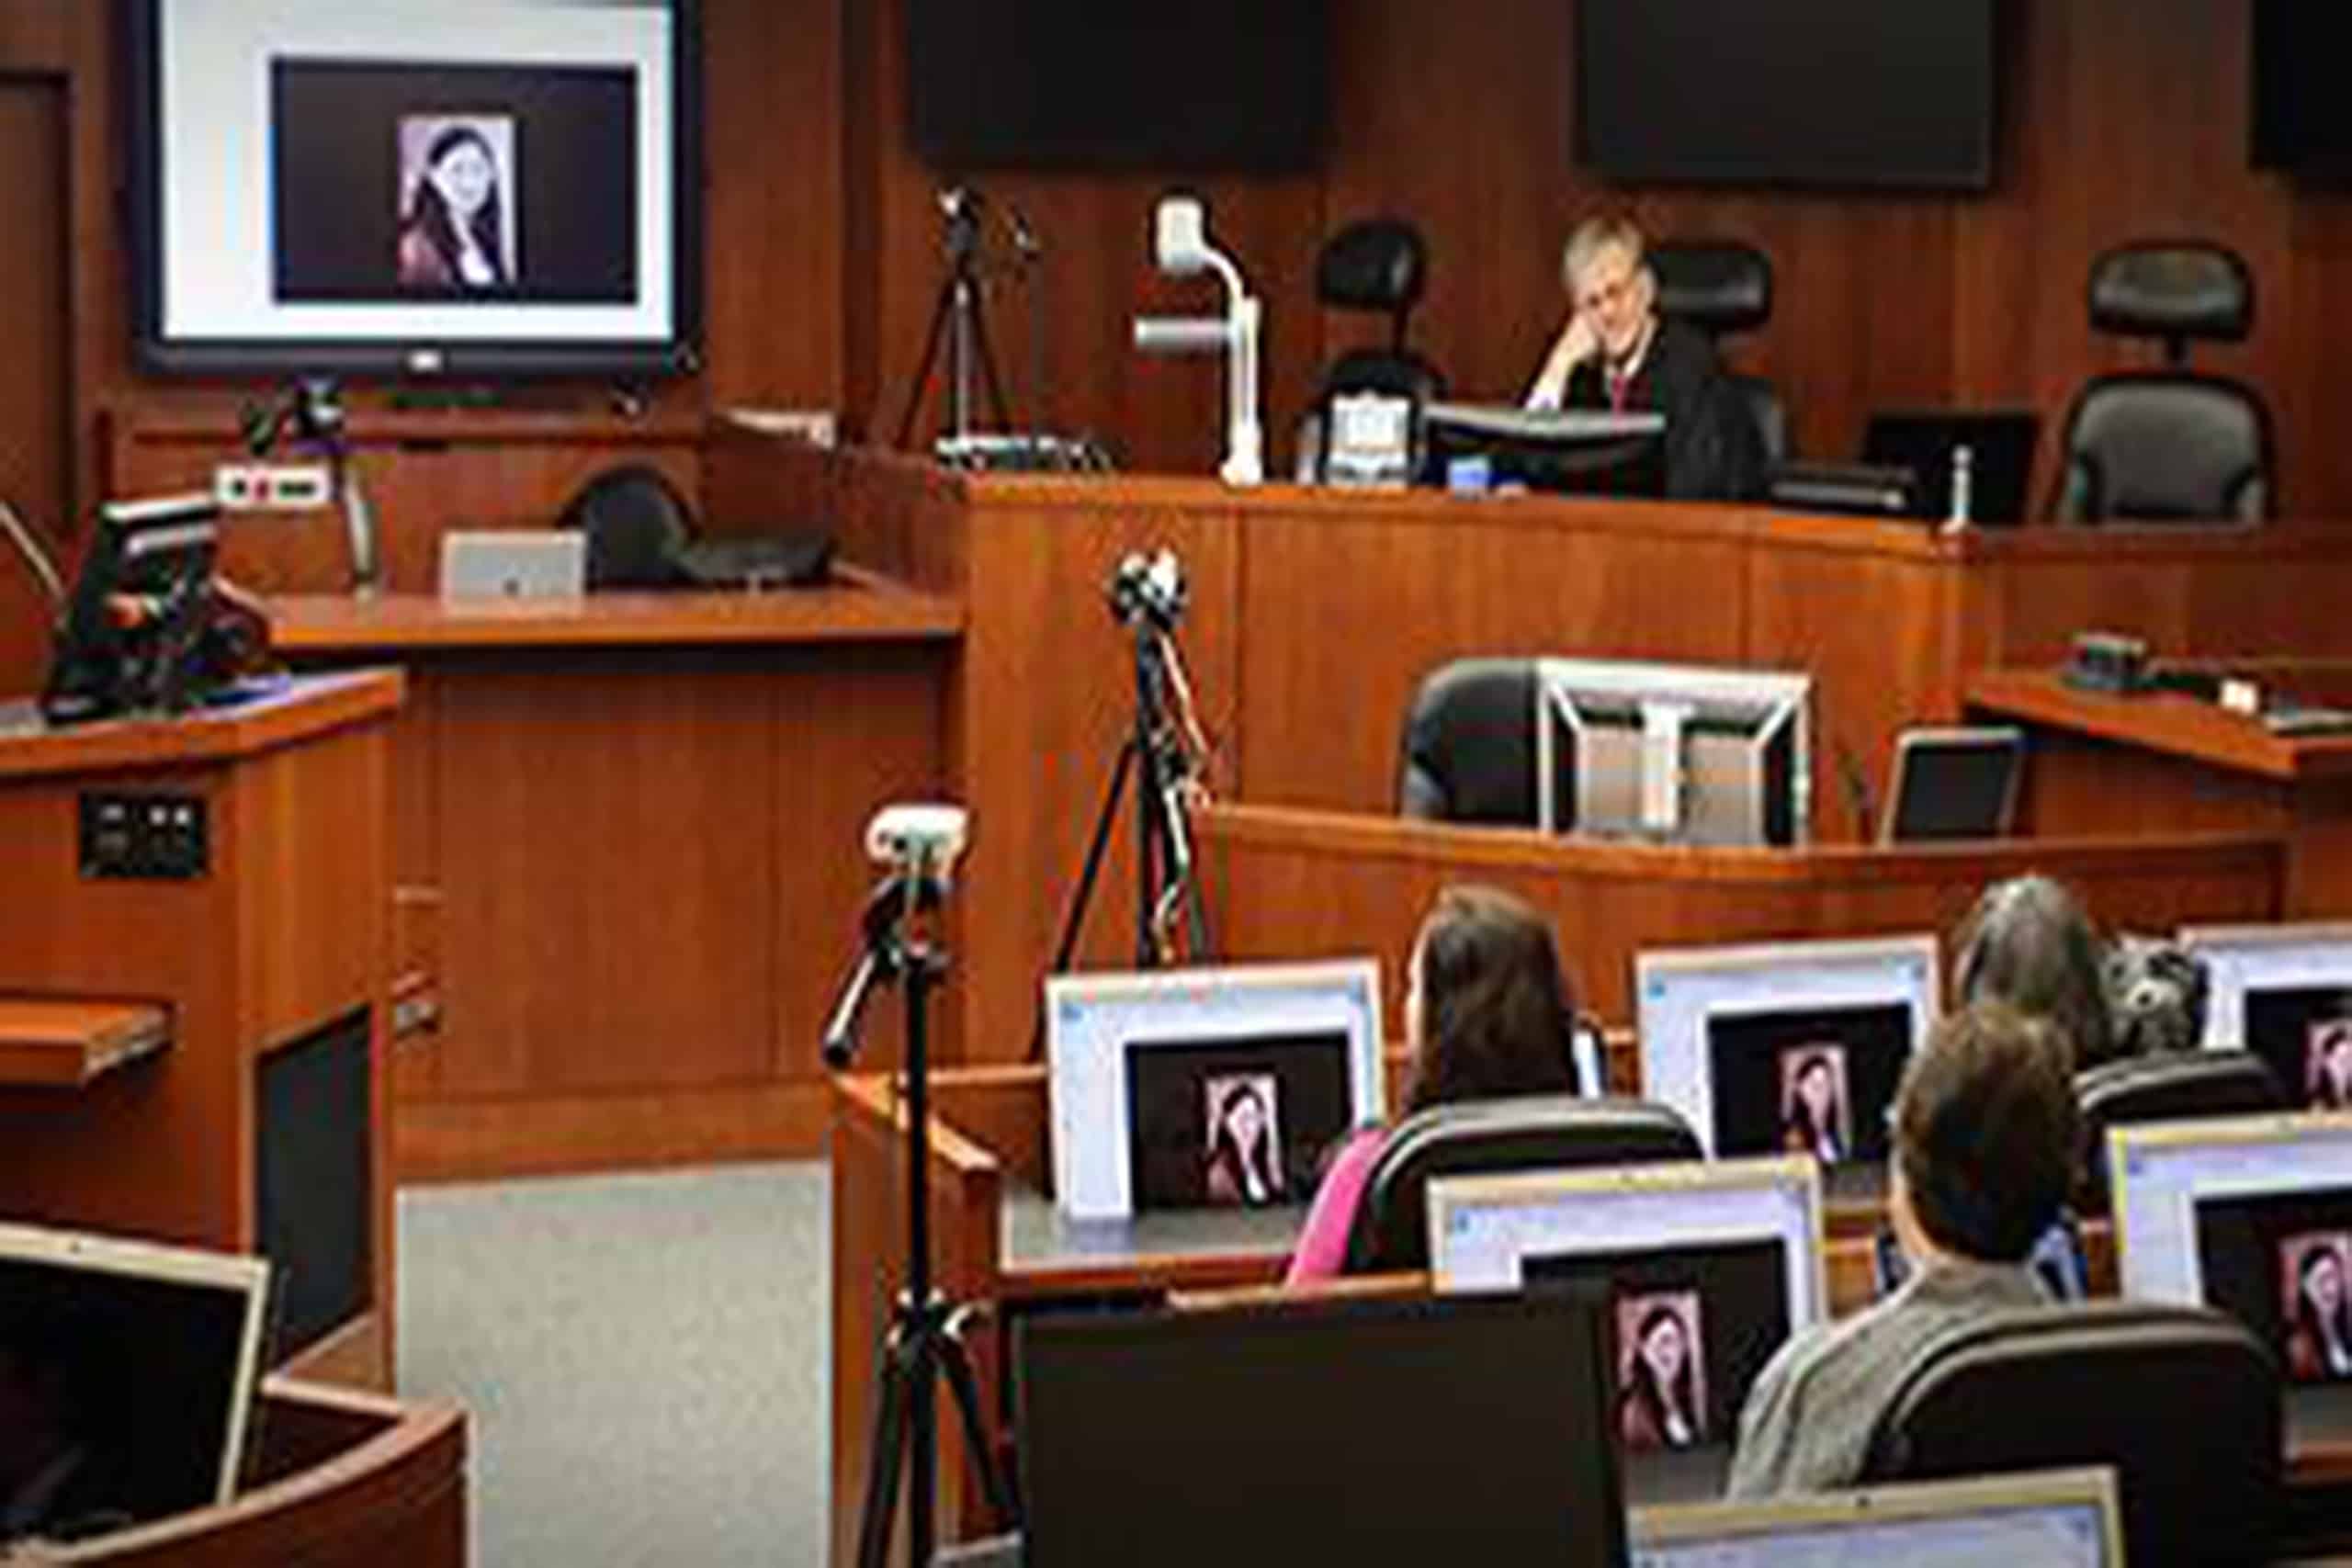 NEC state and local government courtroom AV tech